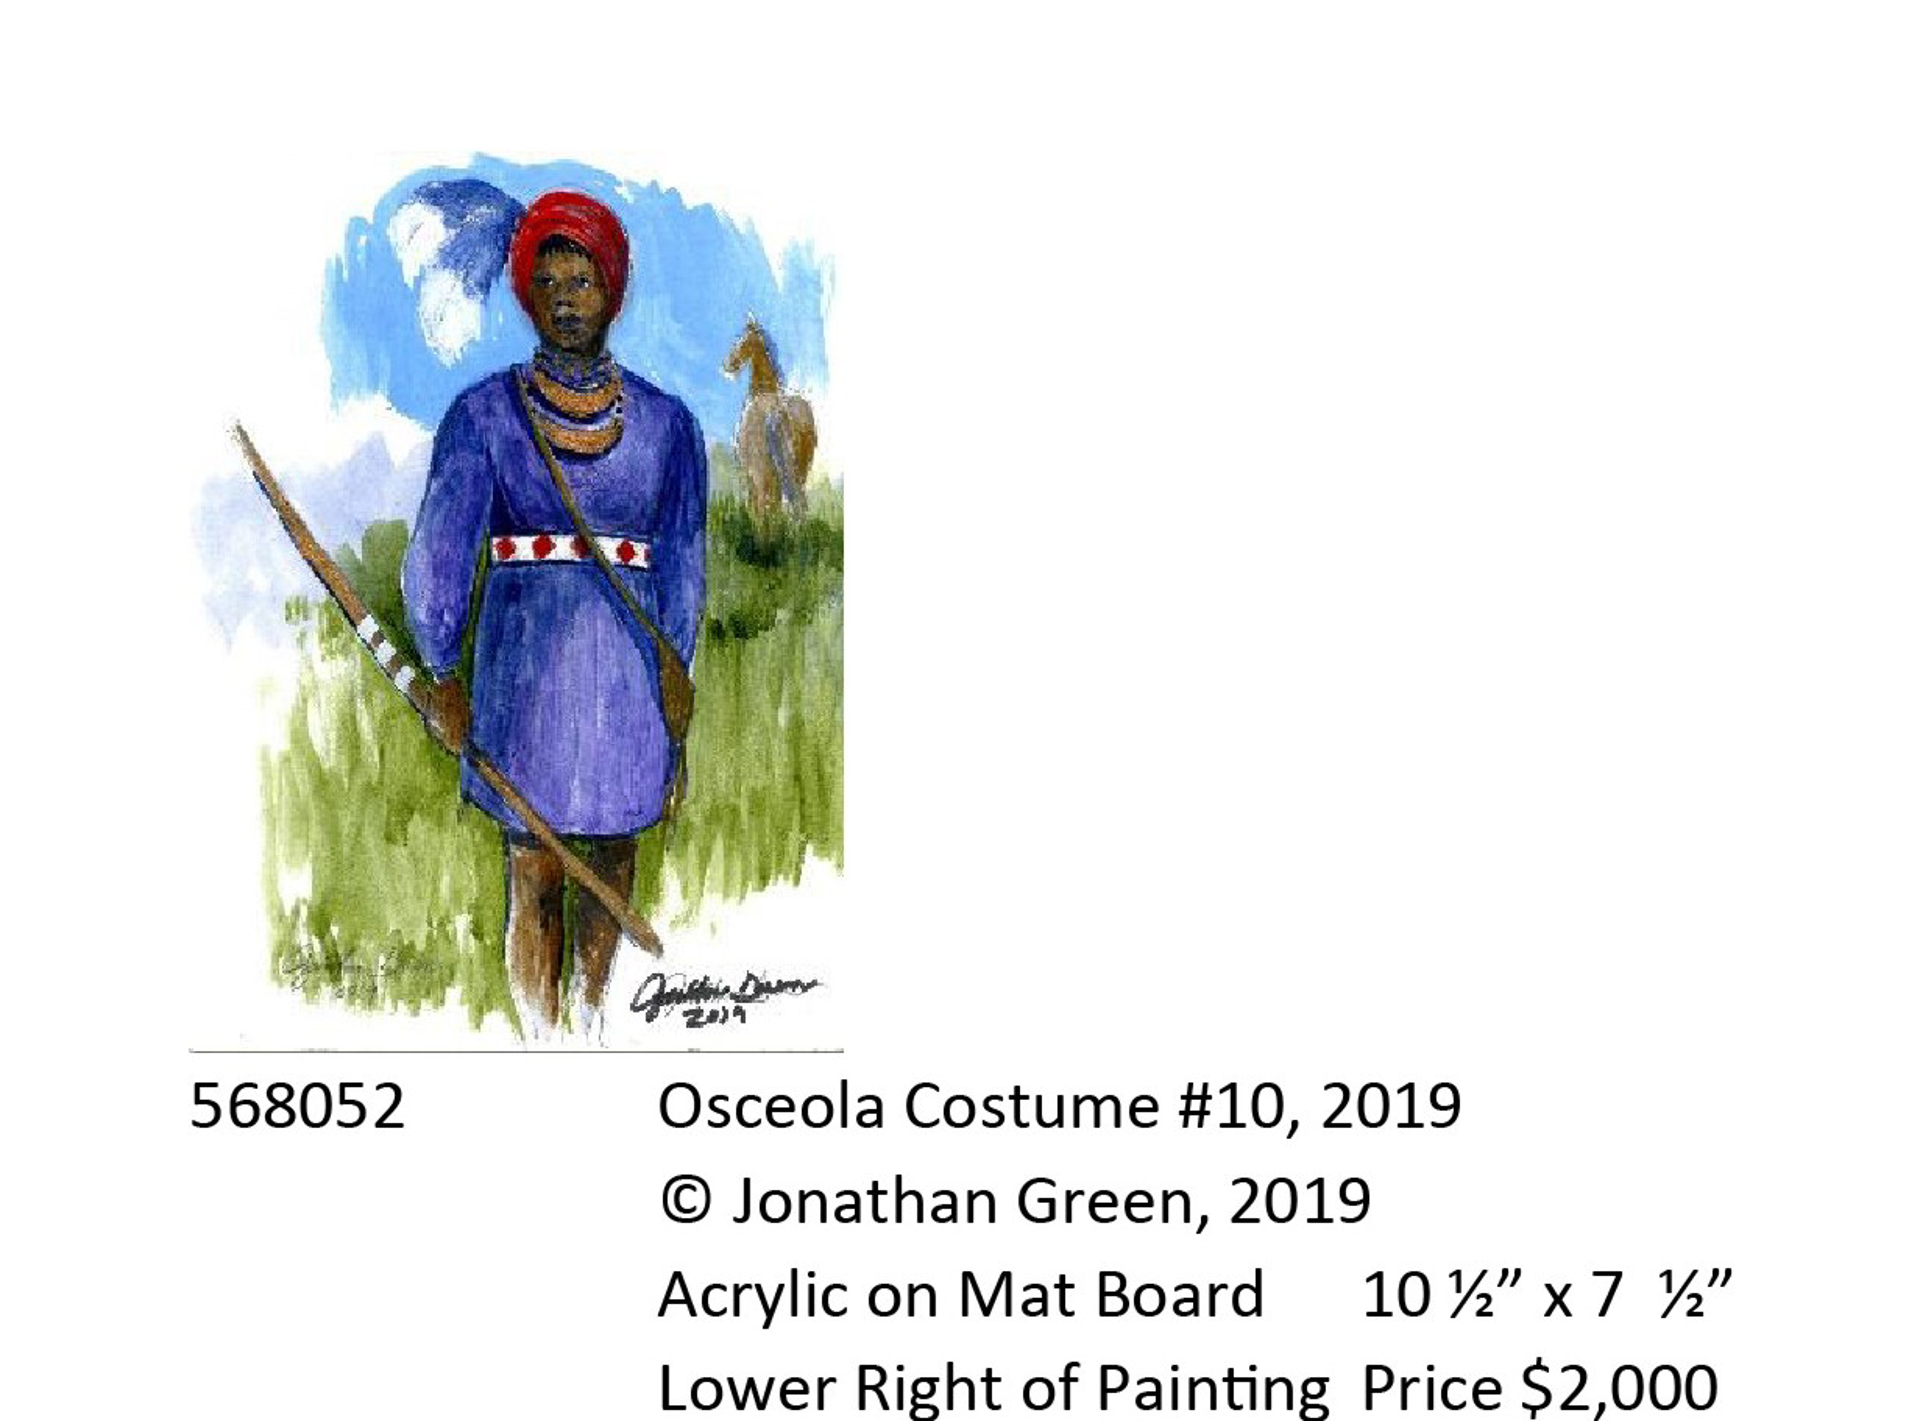 Osceola Costume #10 by Jonathan Green - Pop-Up Event